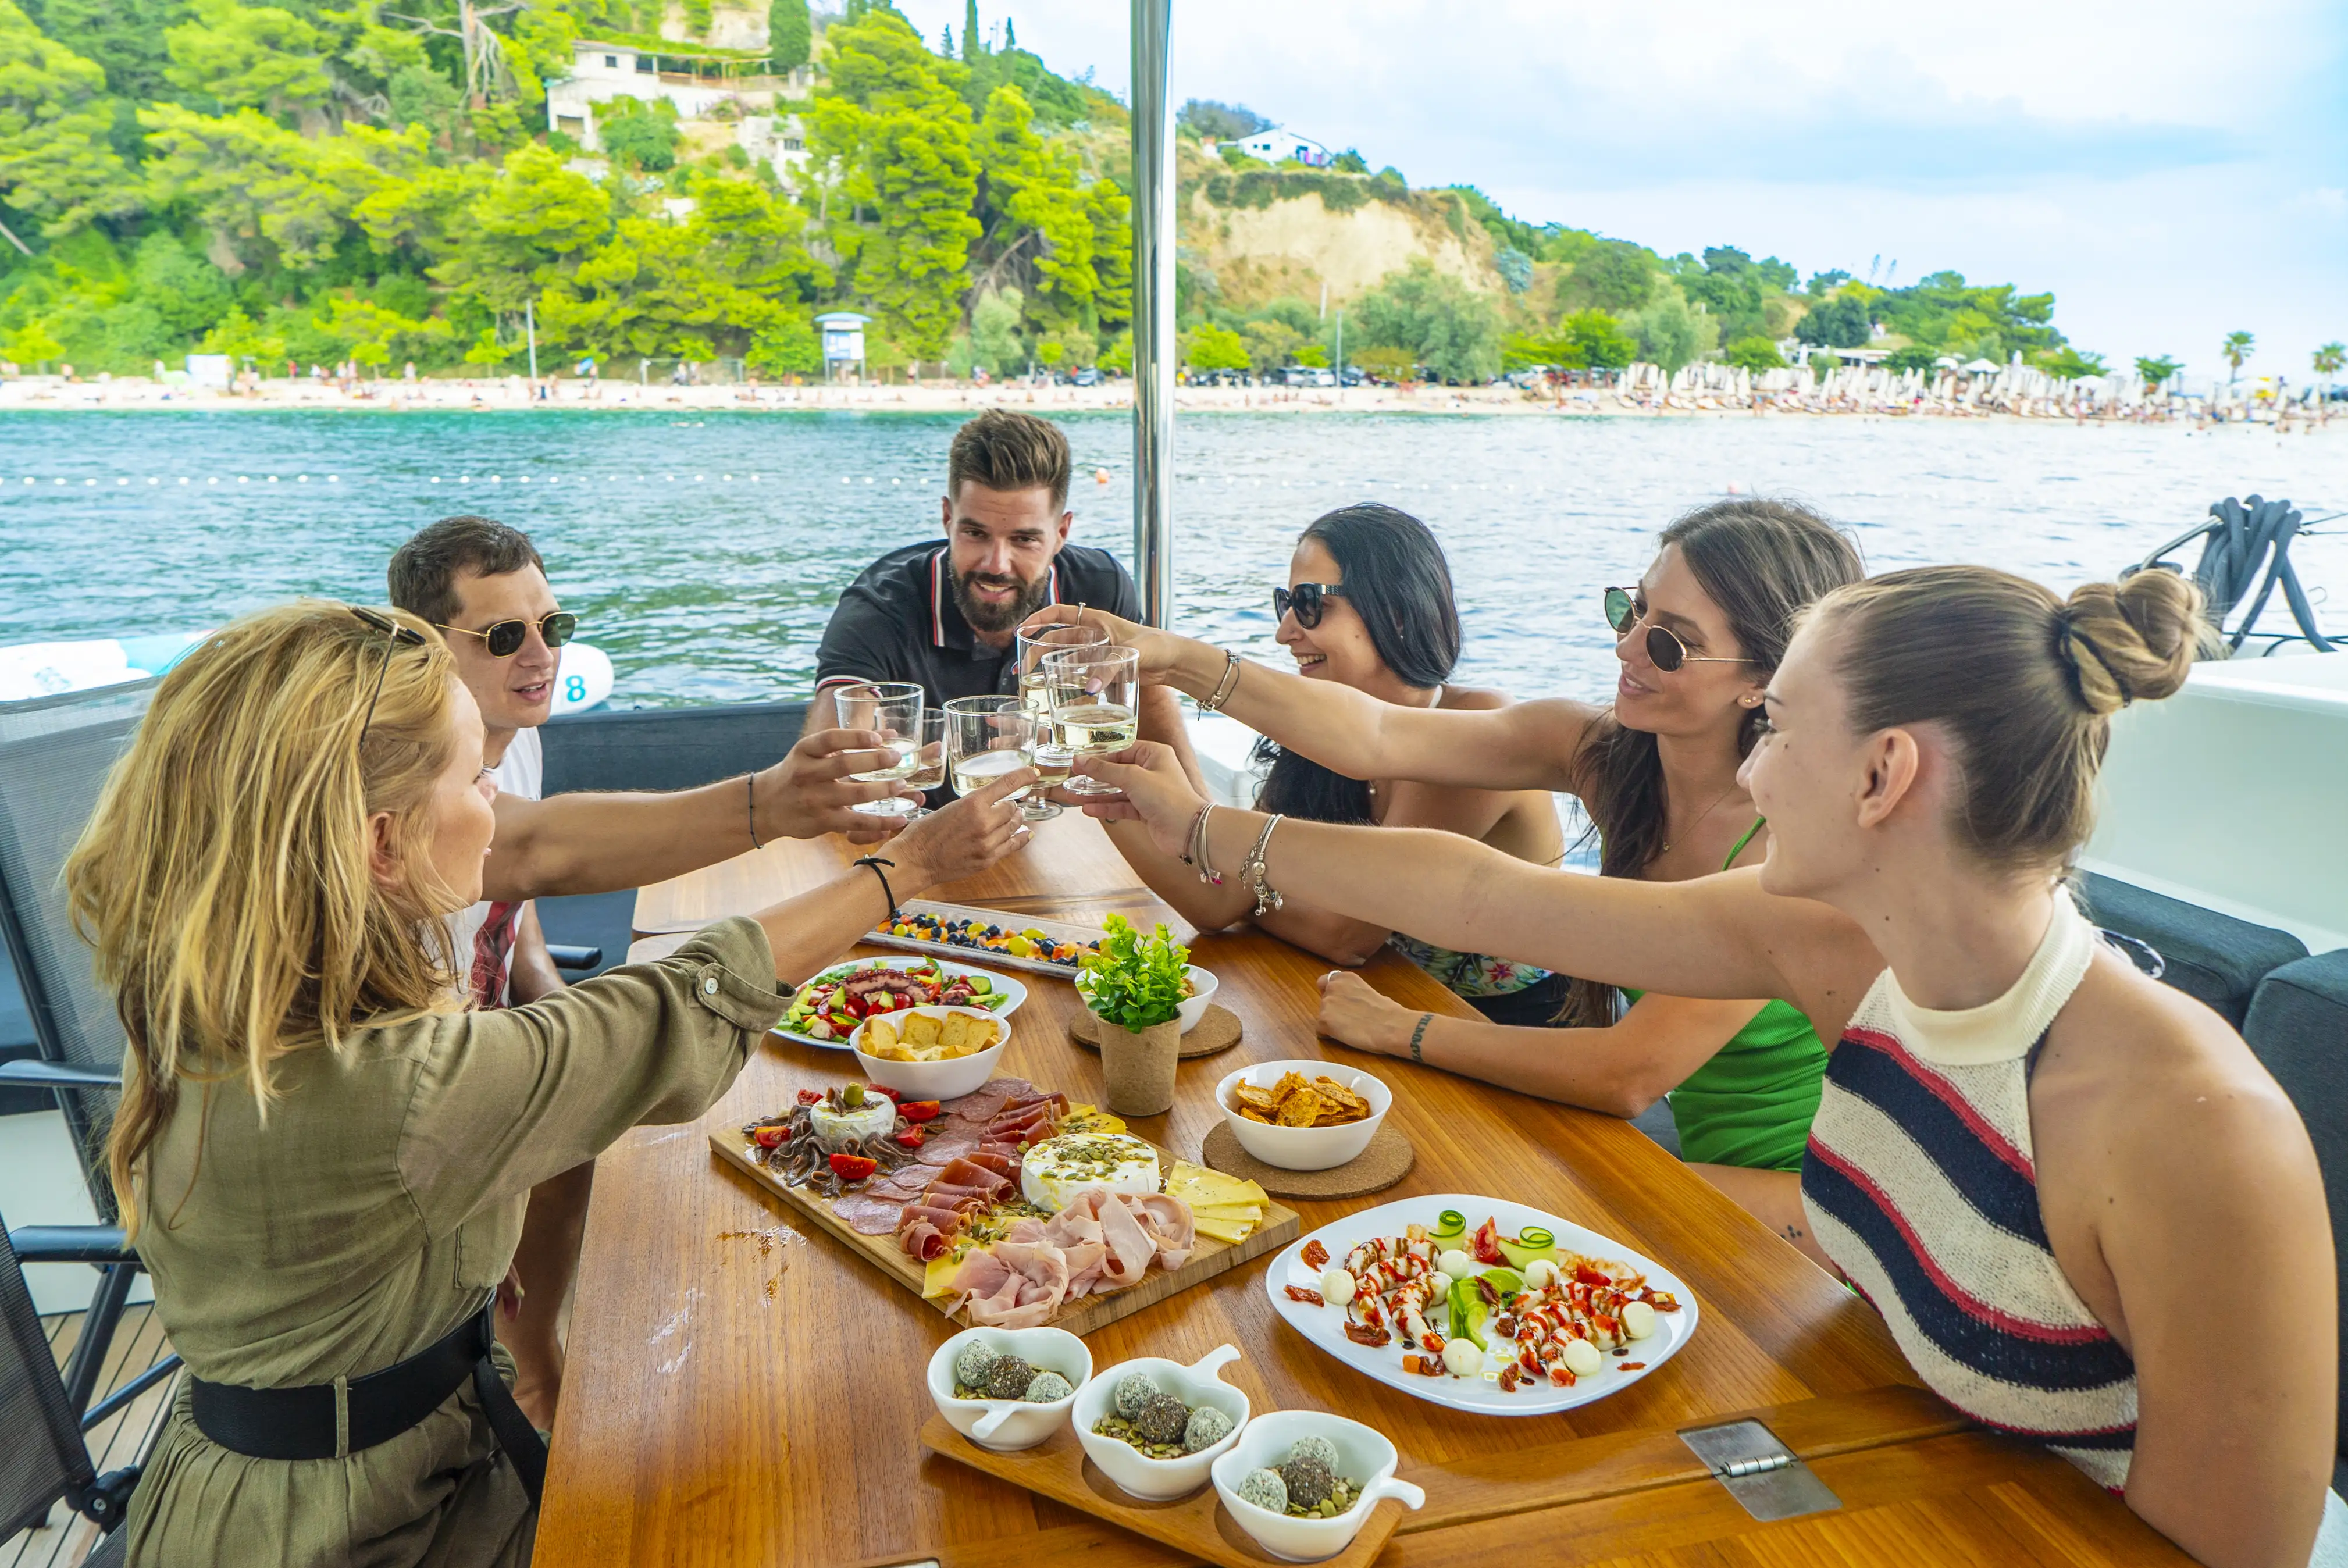 People enjoying the local cuisine on the yacht in dalmatian coast